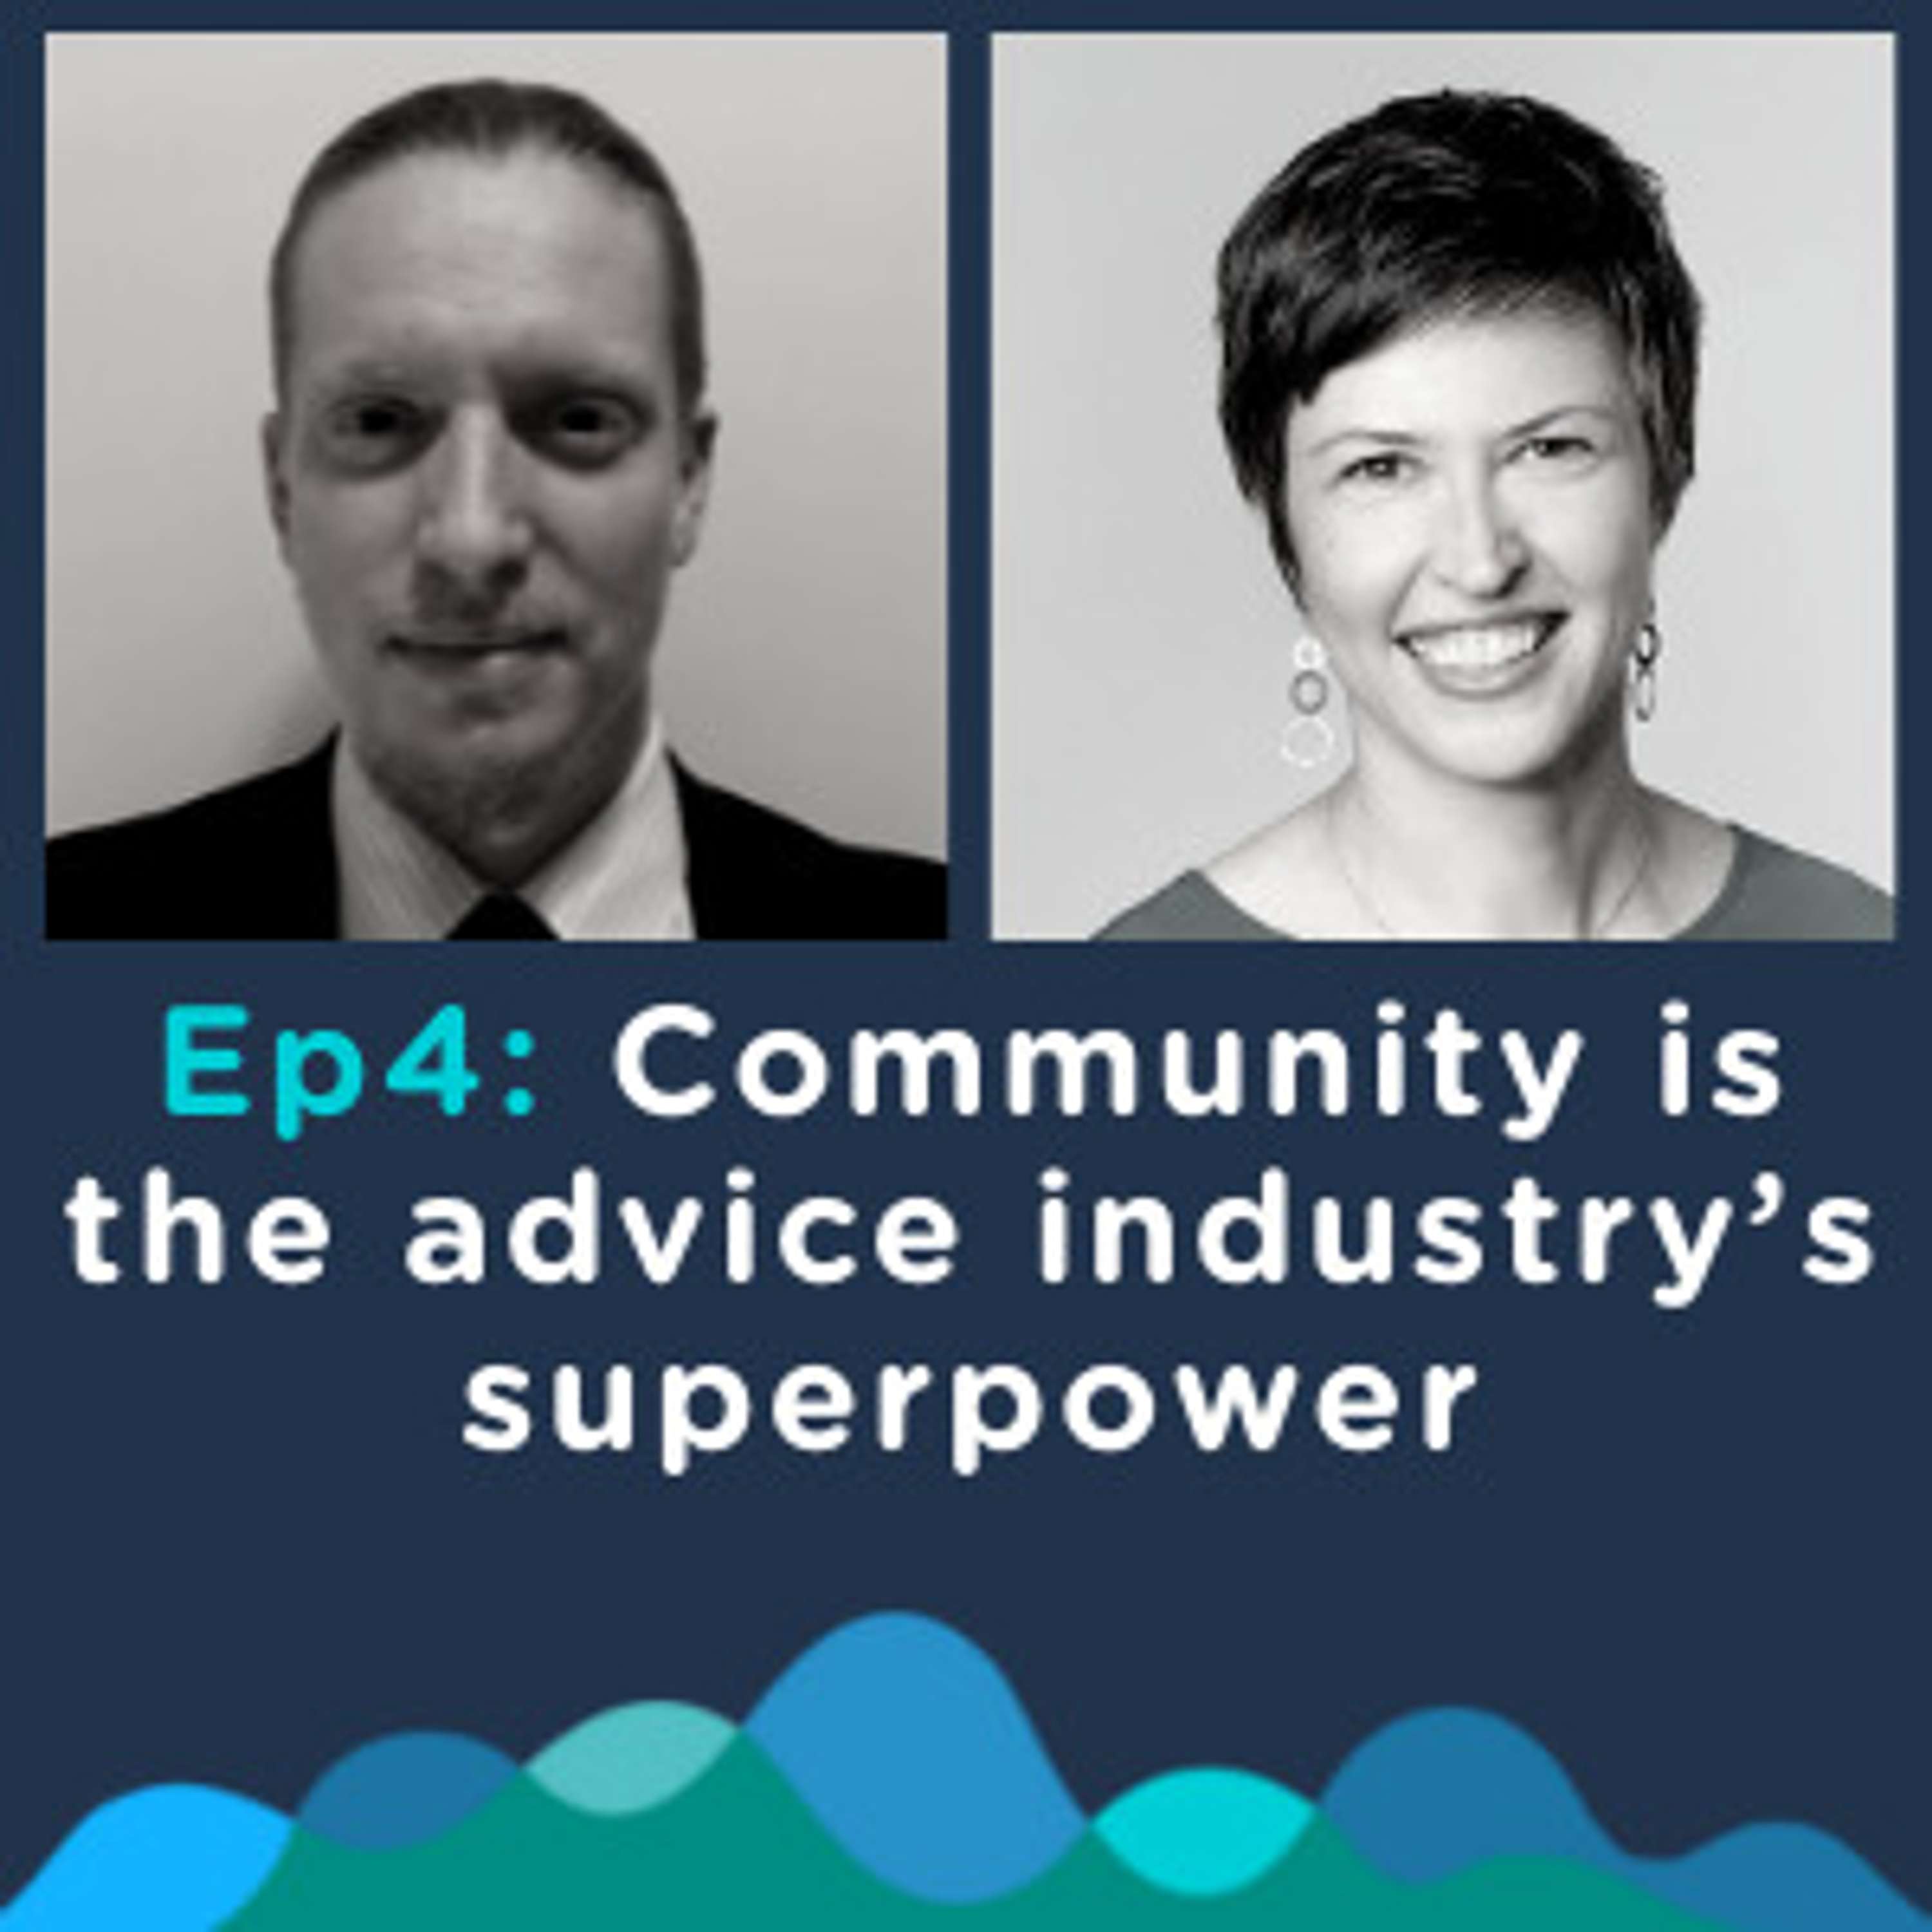 EP4, Season 2: Community is the advice industry’s superpower